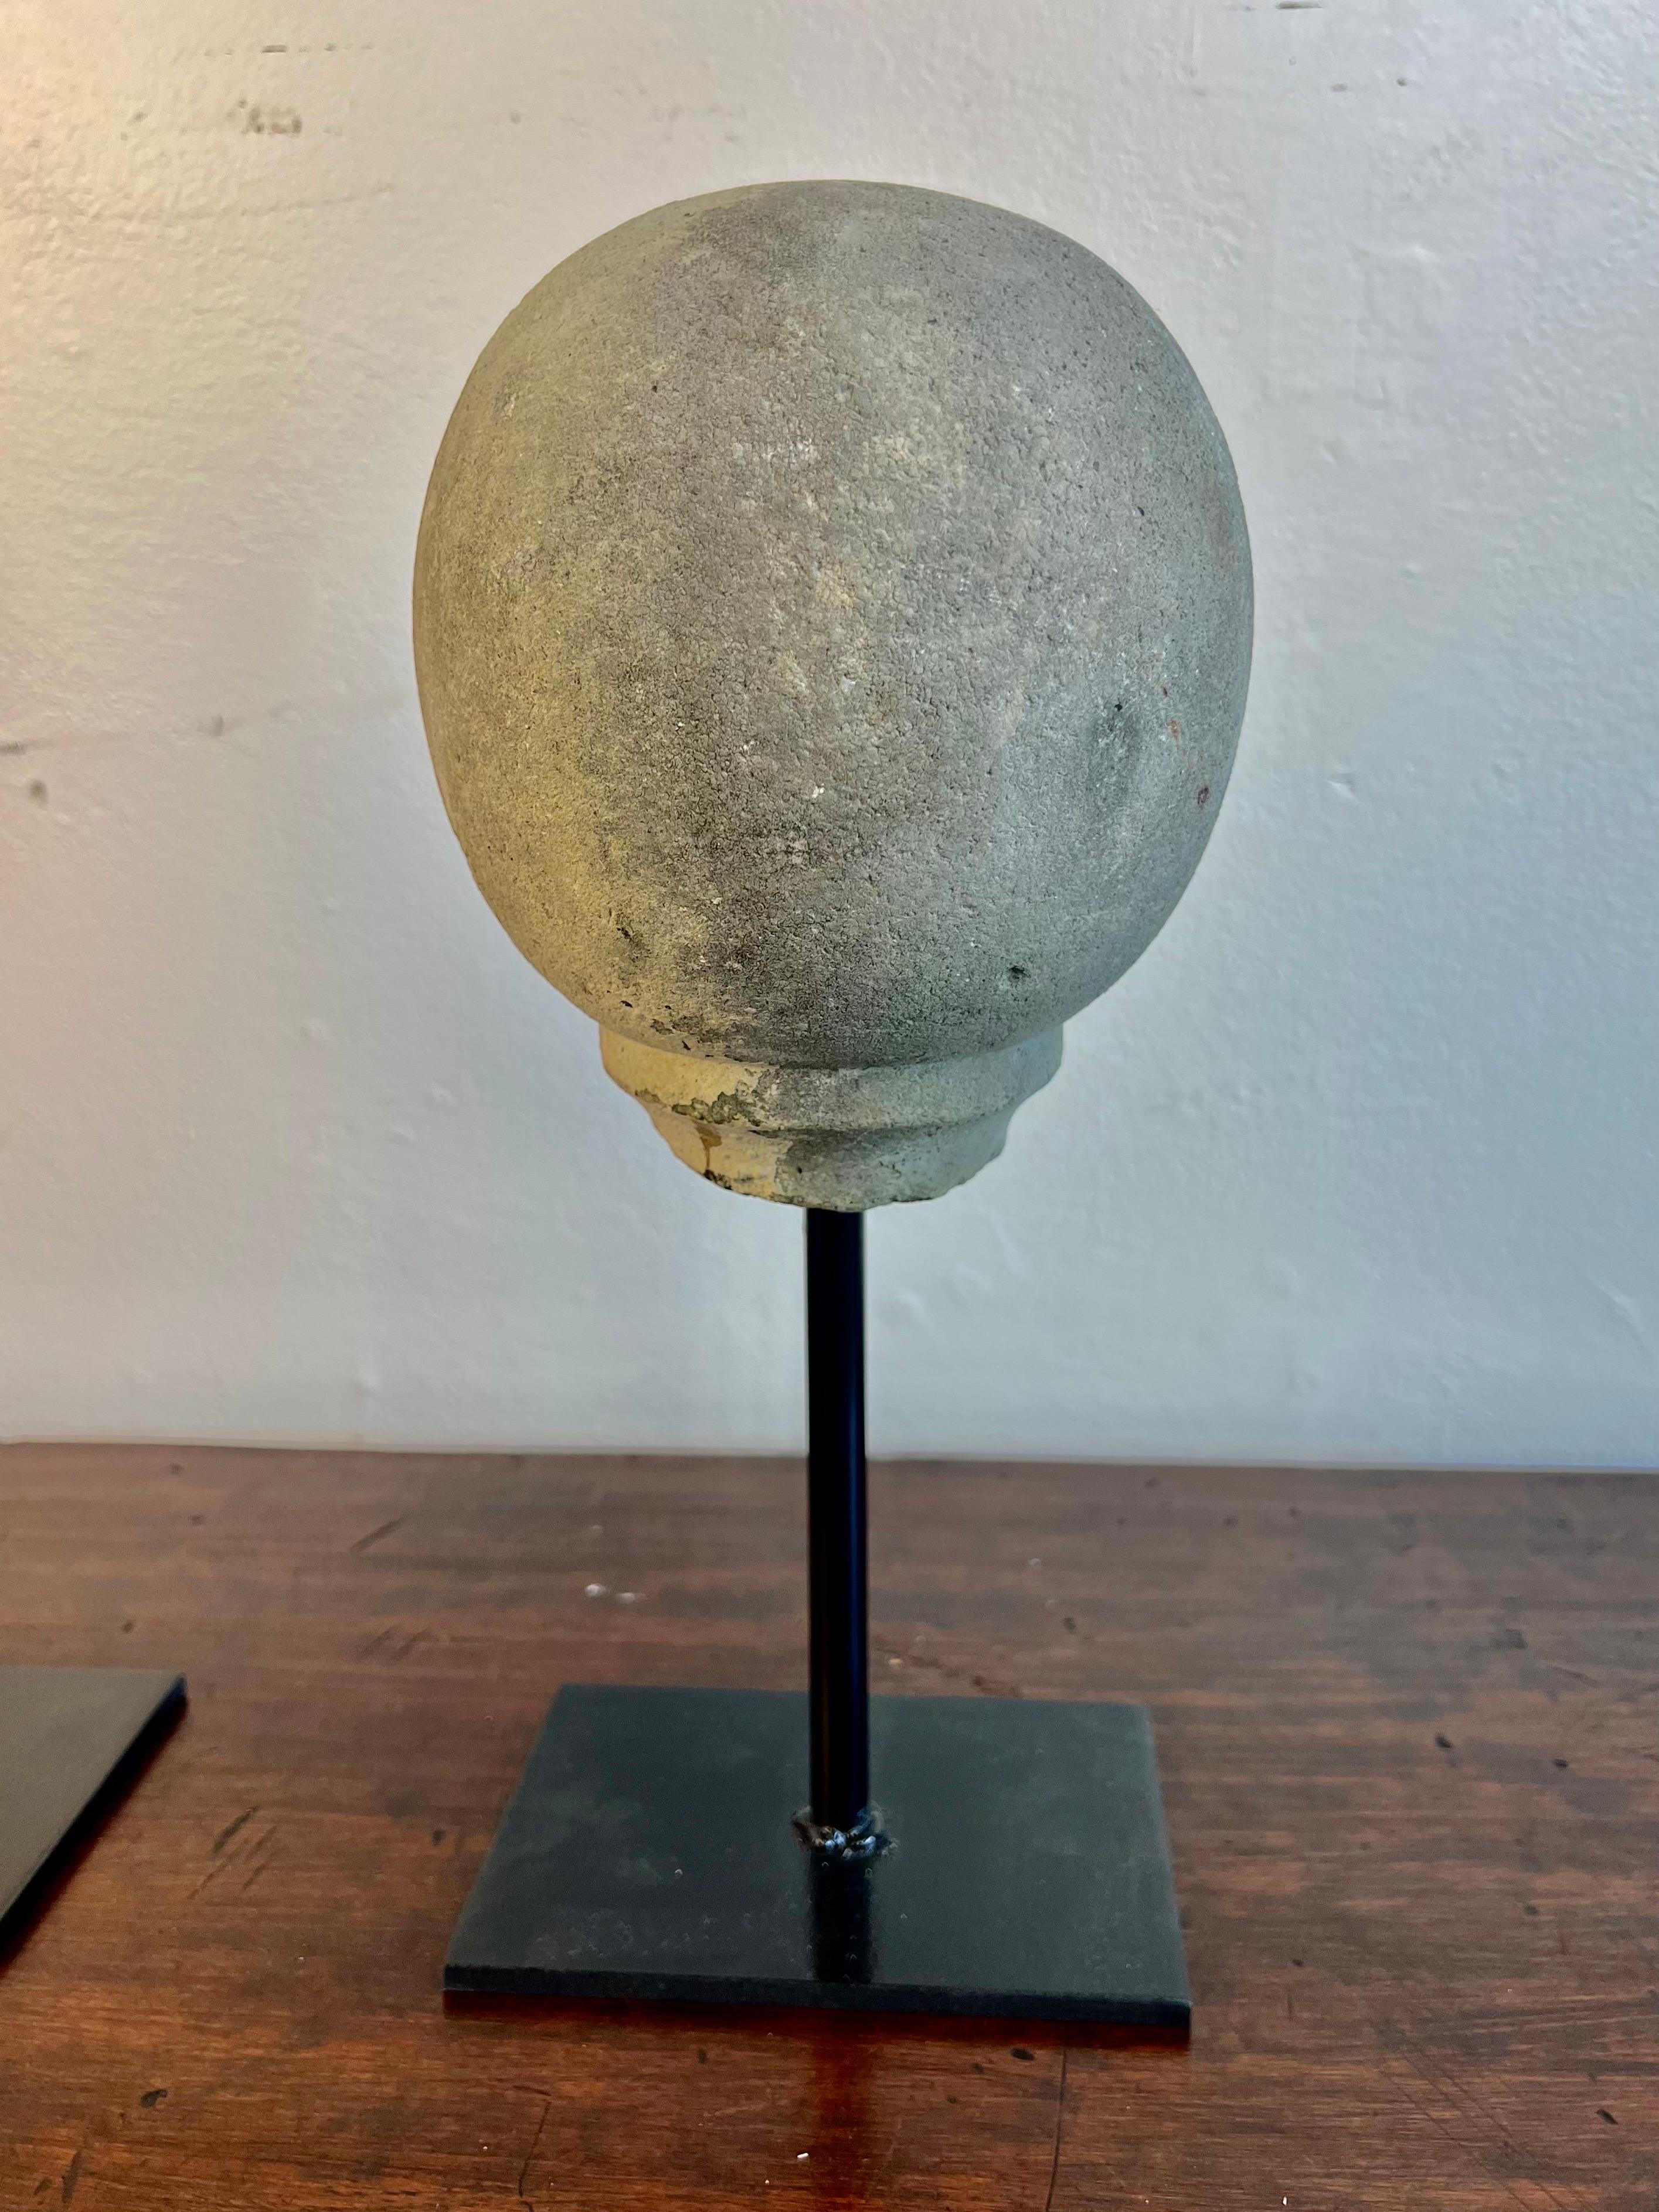 Pair of spheres mounted on iron bases.  One is 19th century and is made of stone.  The second sphere is made of cement and is from the mid 20th century.  They are great accent pieces for a bookshelf or end table.